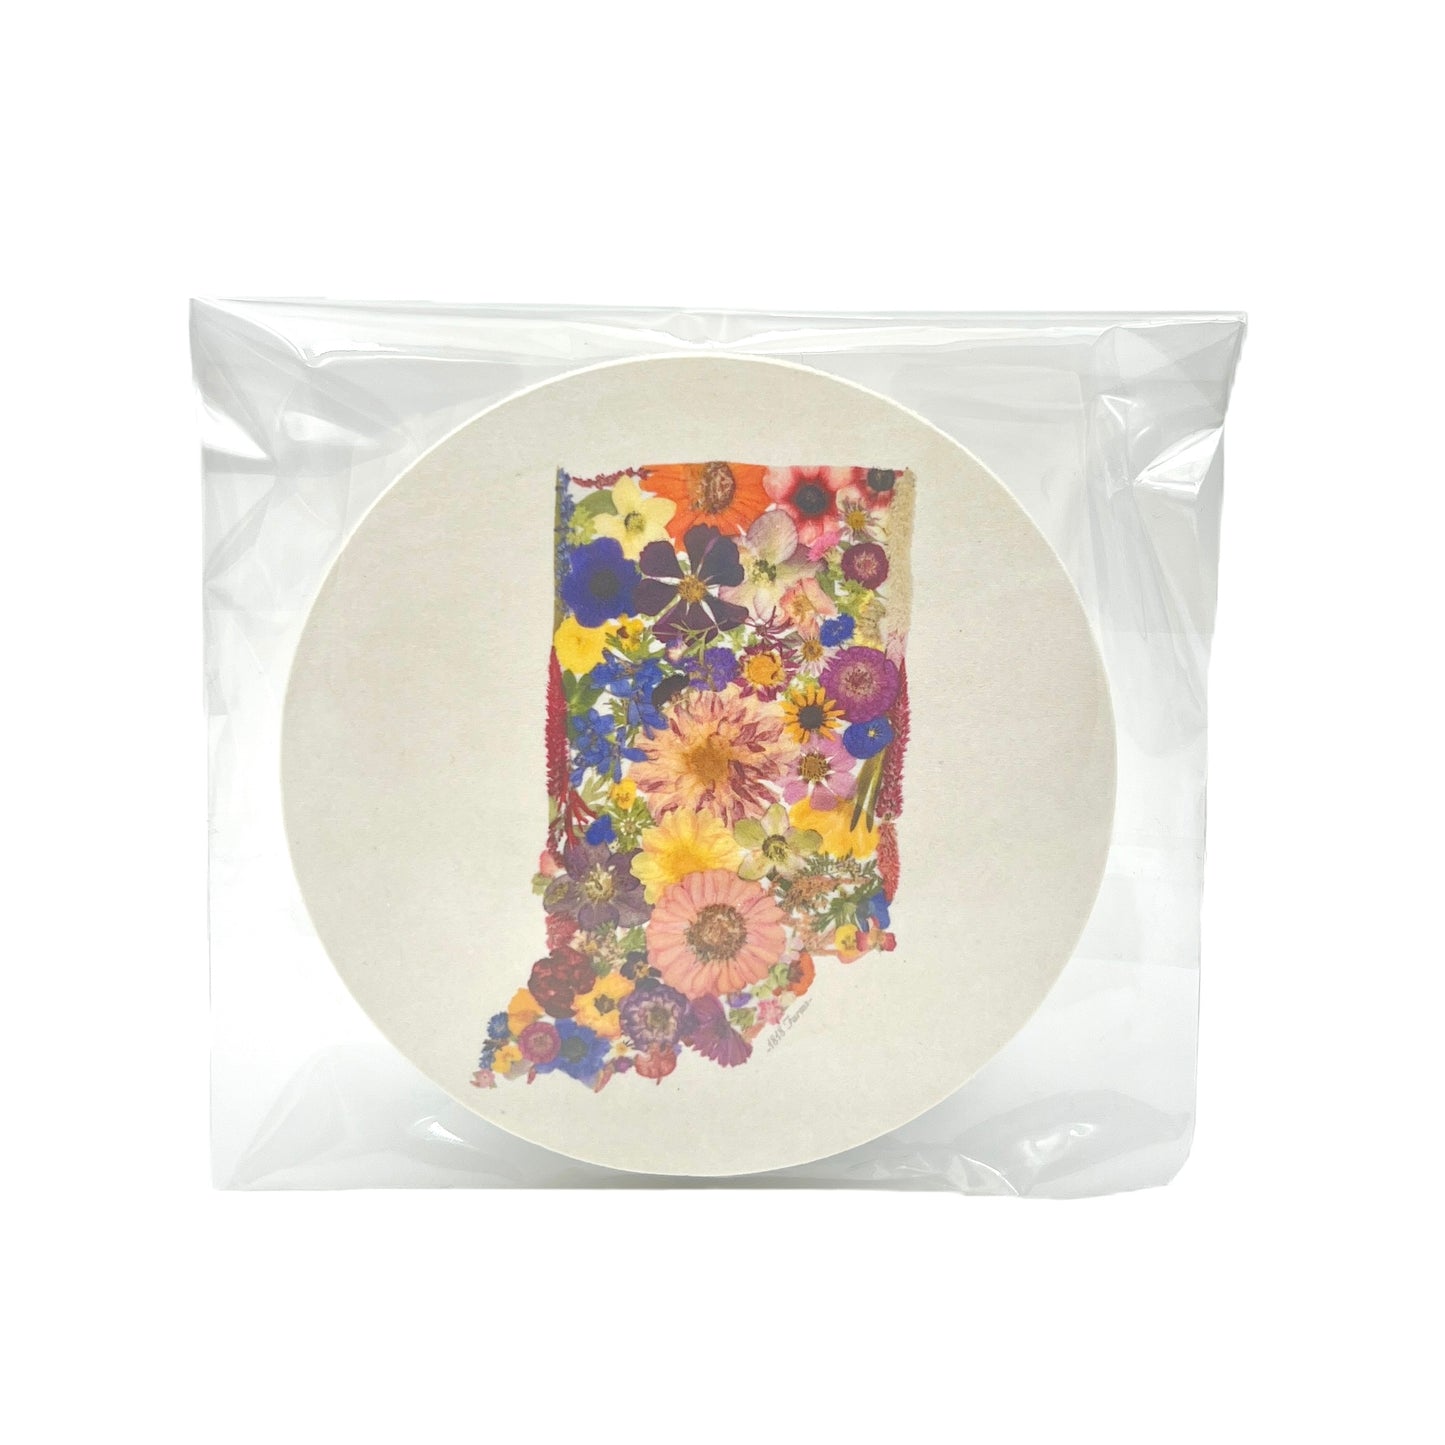 Indiana Themed Coasters (Set of 6)  - "Where I Bloom" Collection Coaster 1818 Farms   